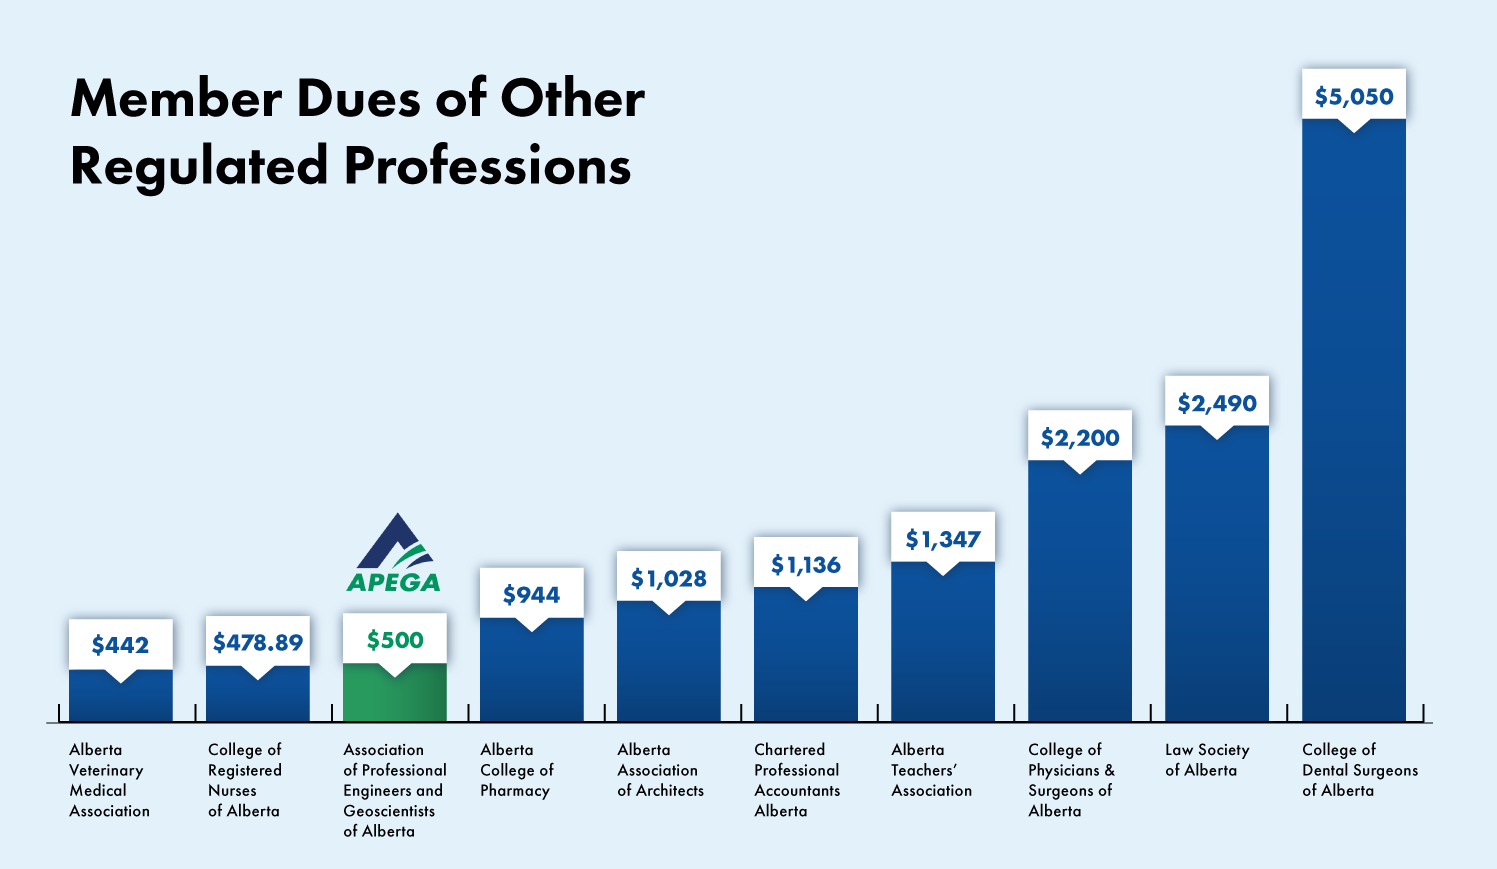 Chart showing the comparison of APEGA's member dues to other regulated professions in Alberta.